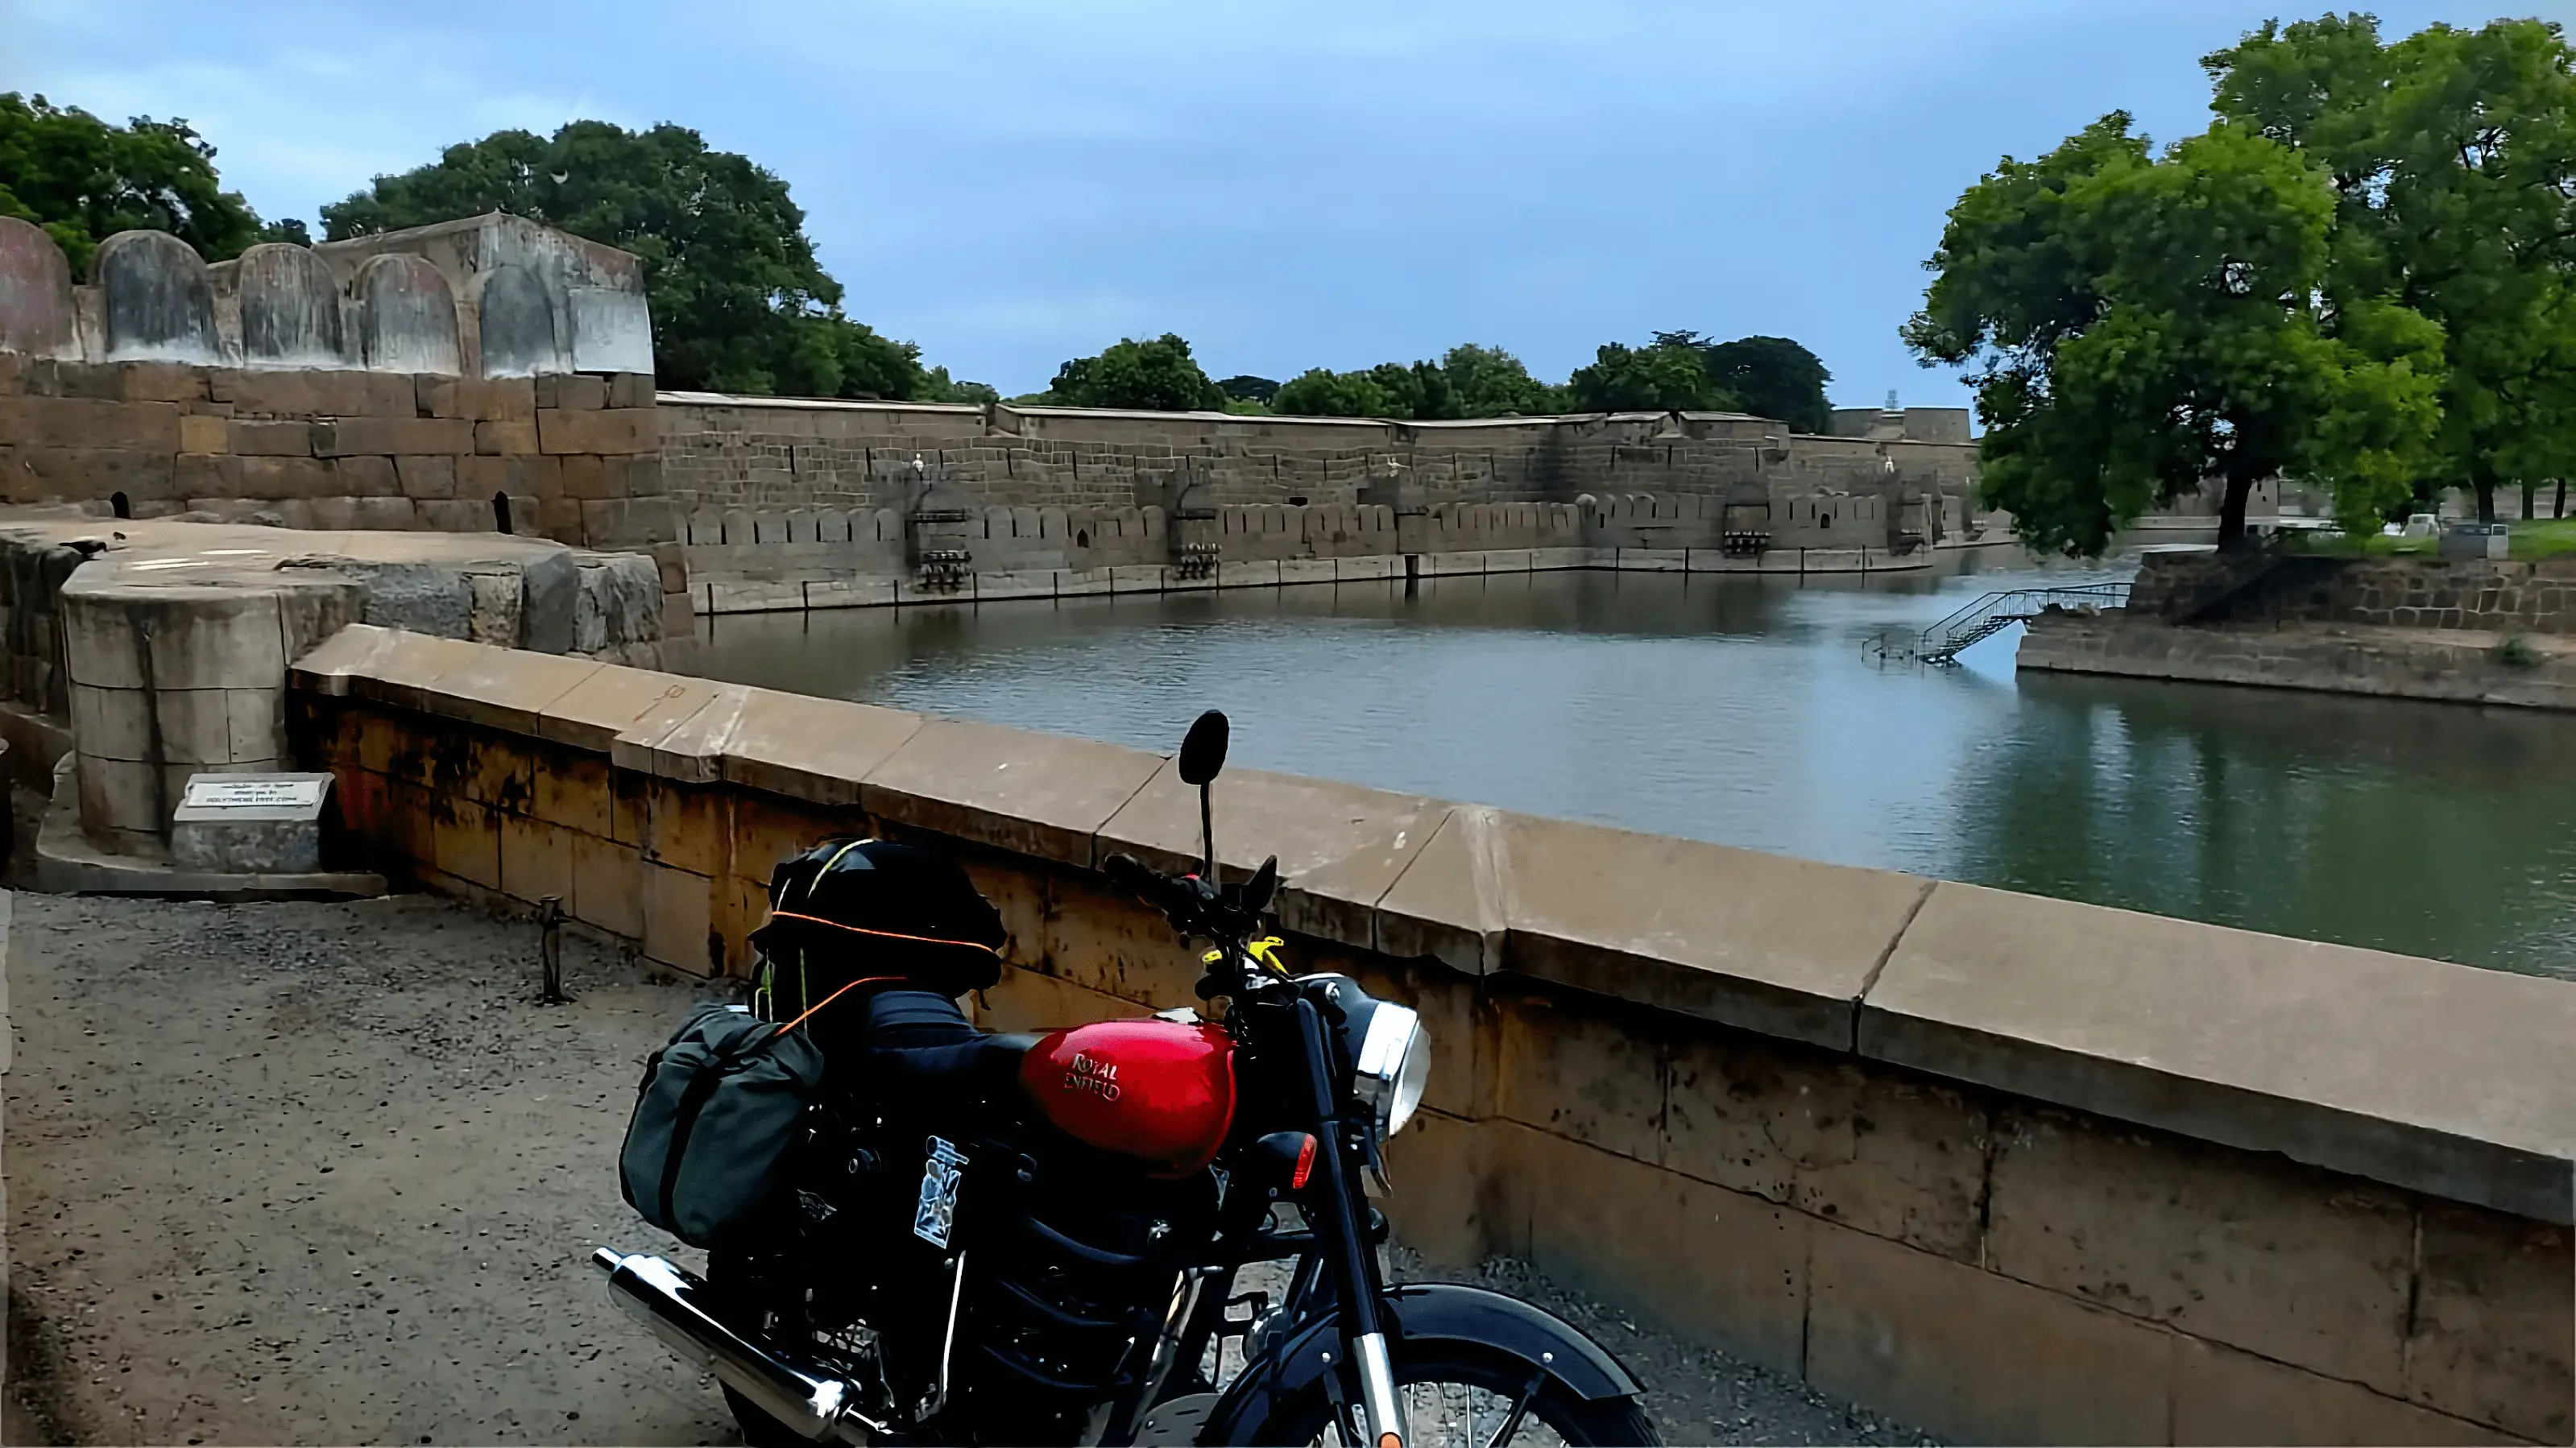 Stopped at Vellore Fort on the way. The first time I'd had the freedom to
            make that kind of stop. It was really weird knowing it was entirely my trip
            and I didn't have anyone to answer to or any plan to keep up.